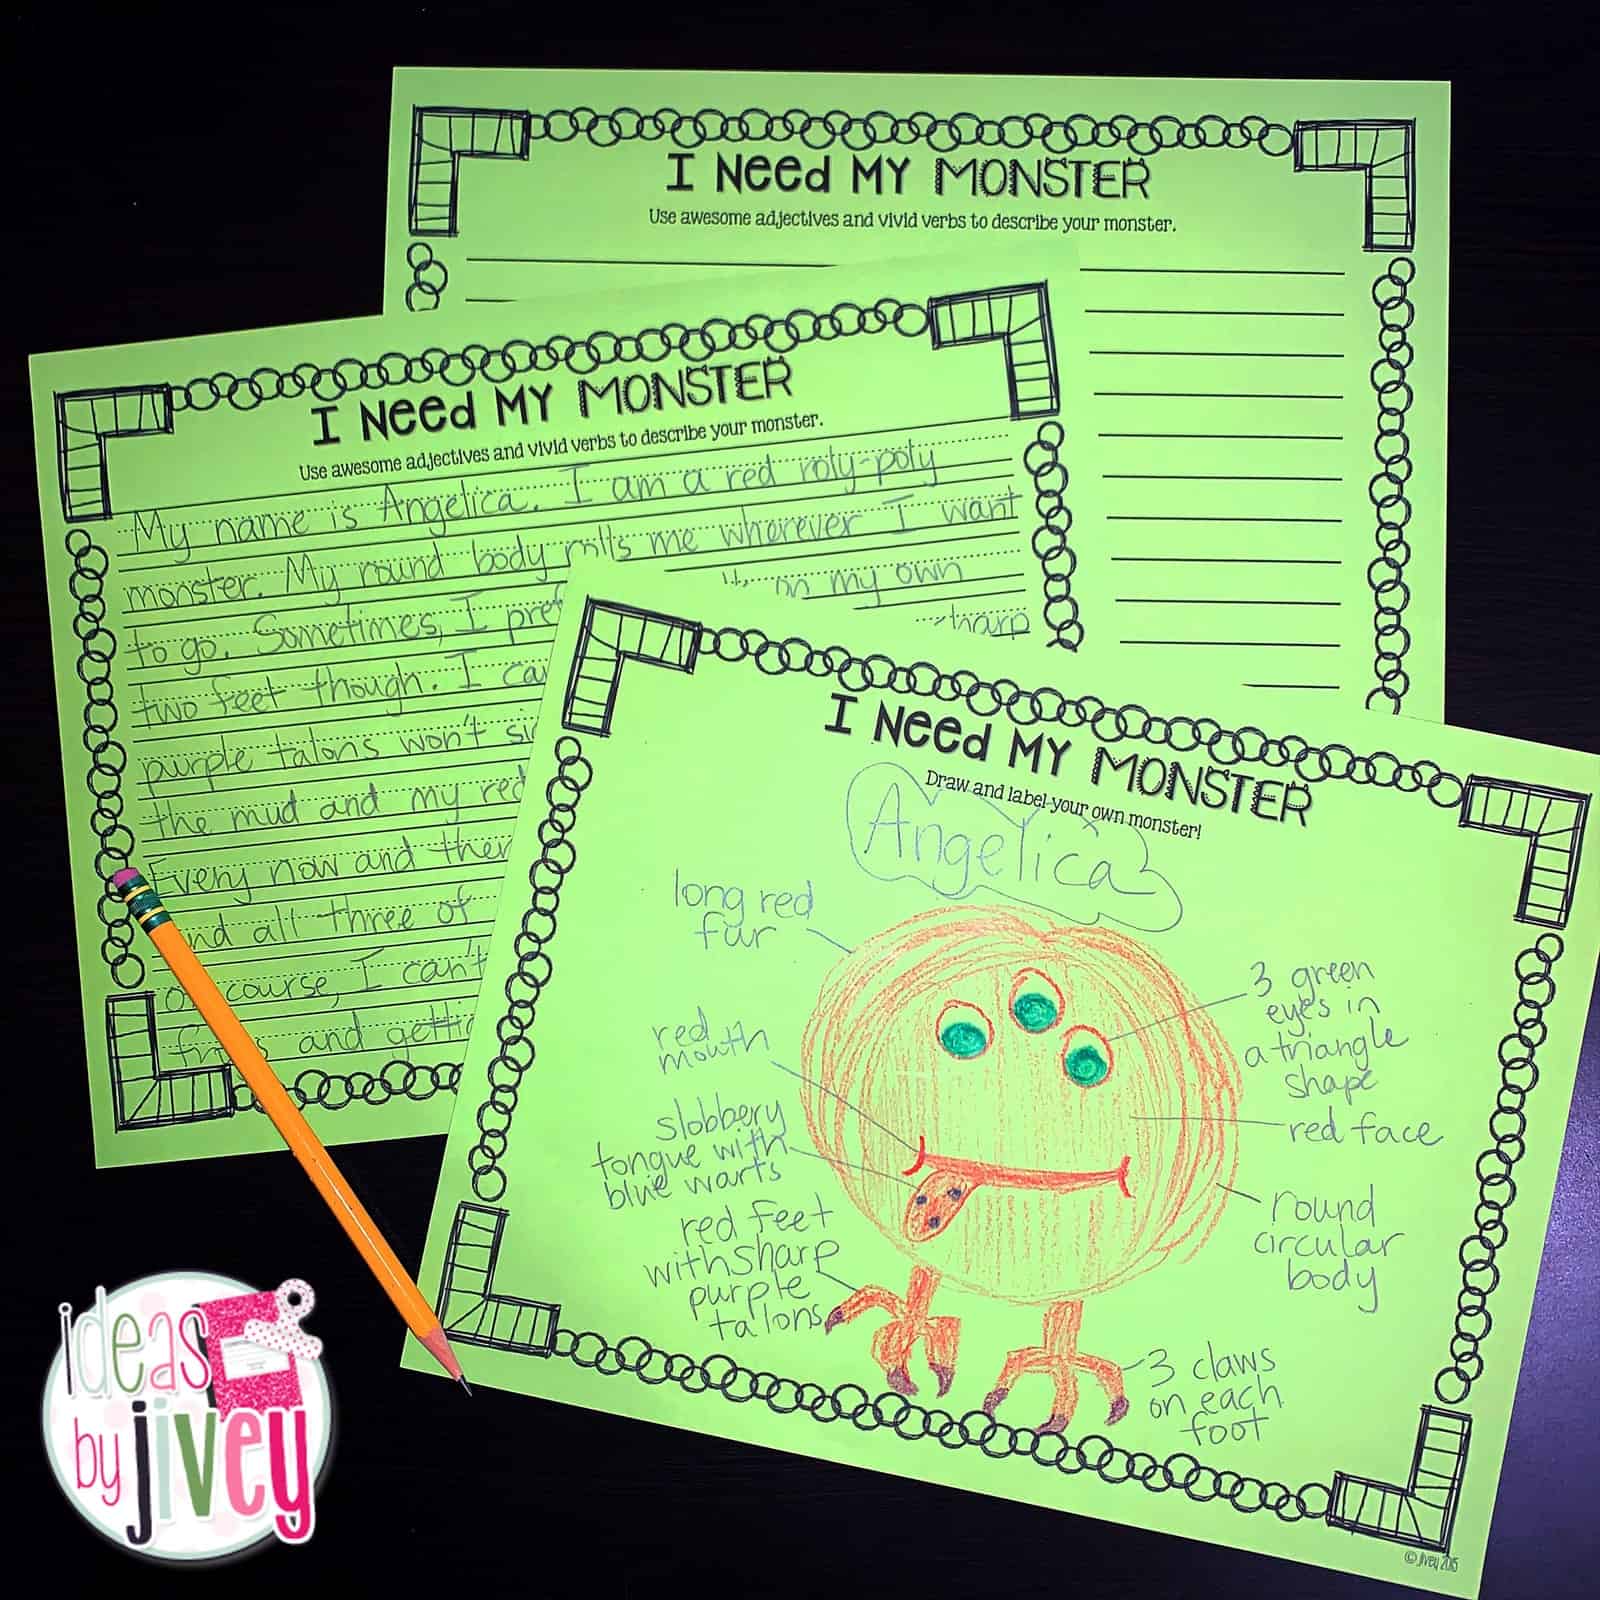 Descriptive writing is a tricky skill for students to master, but with mentor text modeling and practice, they can! Check out this free lesson download for the mentor text, I Need My Monster to help with "show, don't tell" writing. #mentortext #2ndgrade #3rdgrade #4thgrade #5thgrade